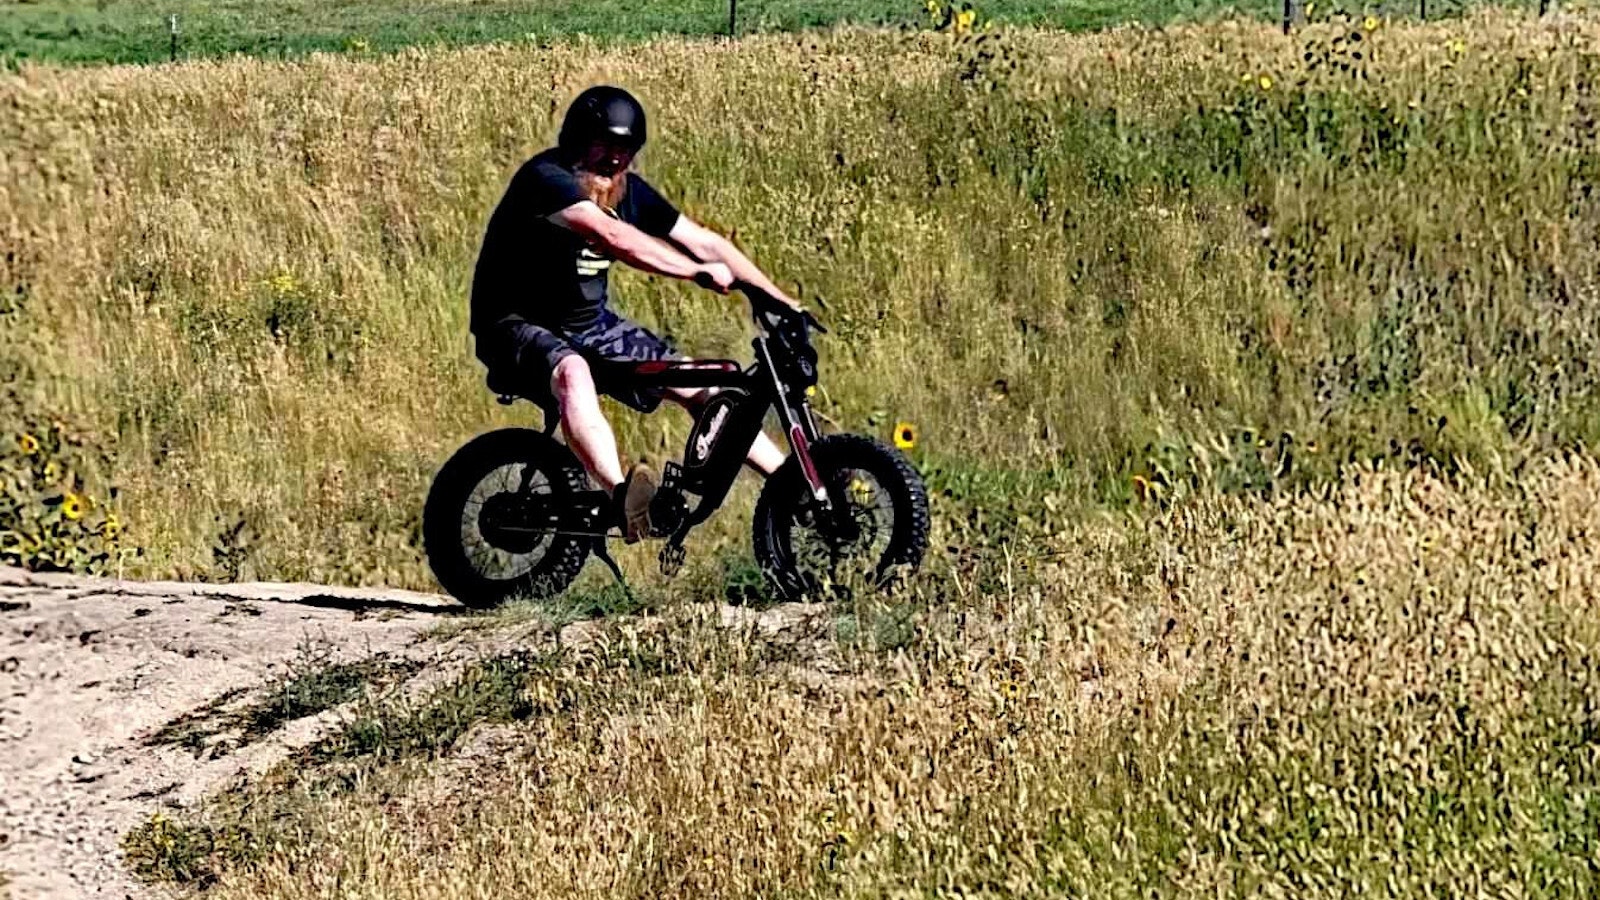 Aaron Turpen put the new Indian Hooligan e-bike through its paces.